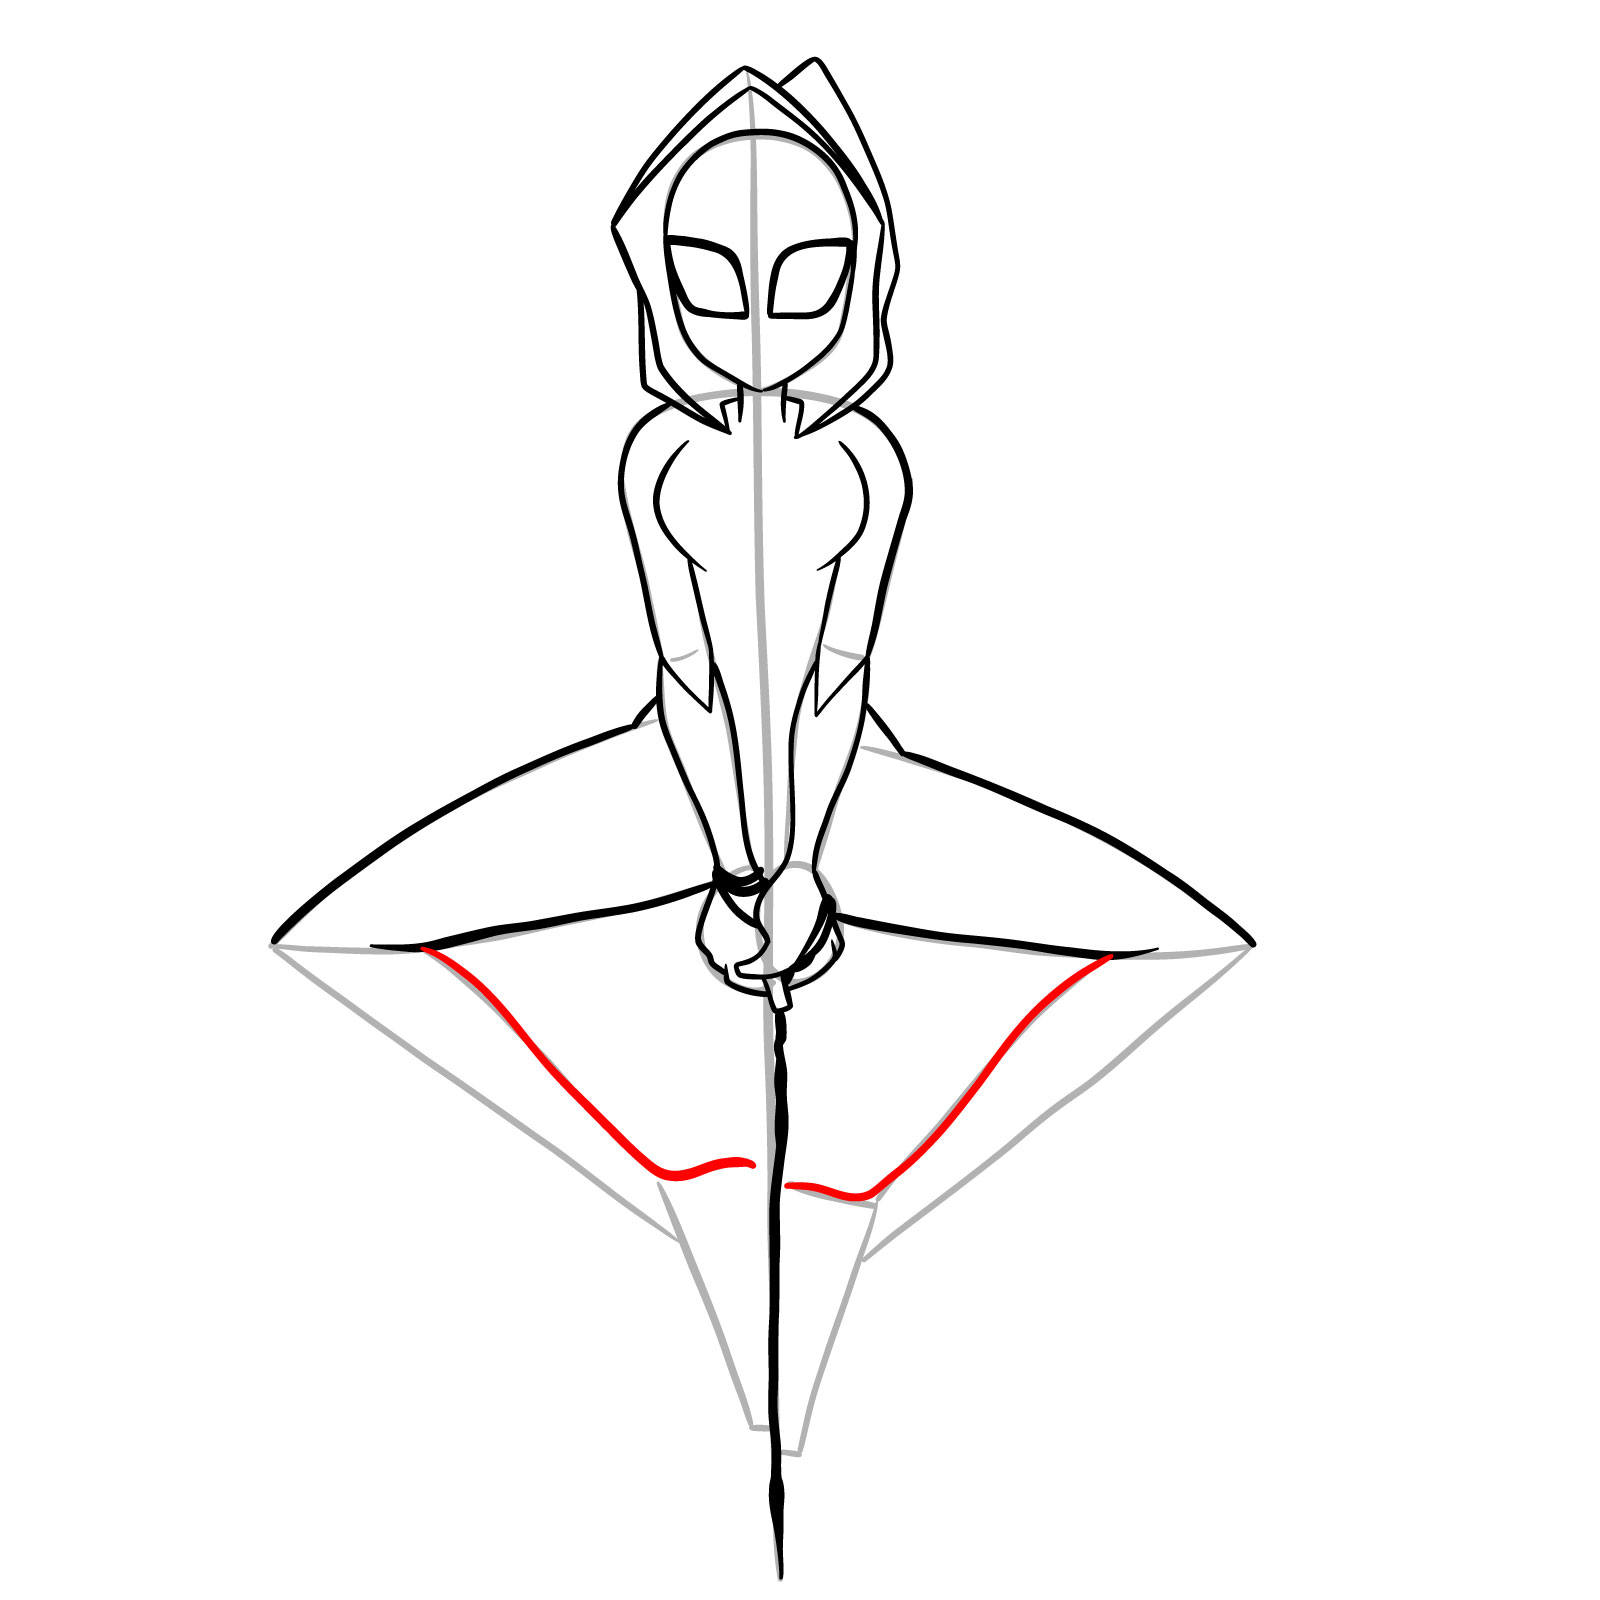 How to draw Spider-Gwen hanging on a web - step 22